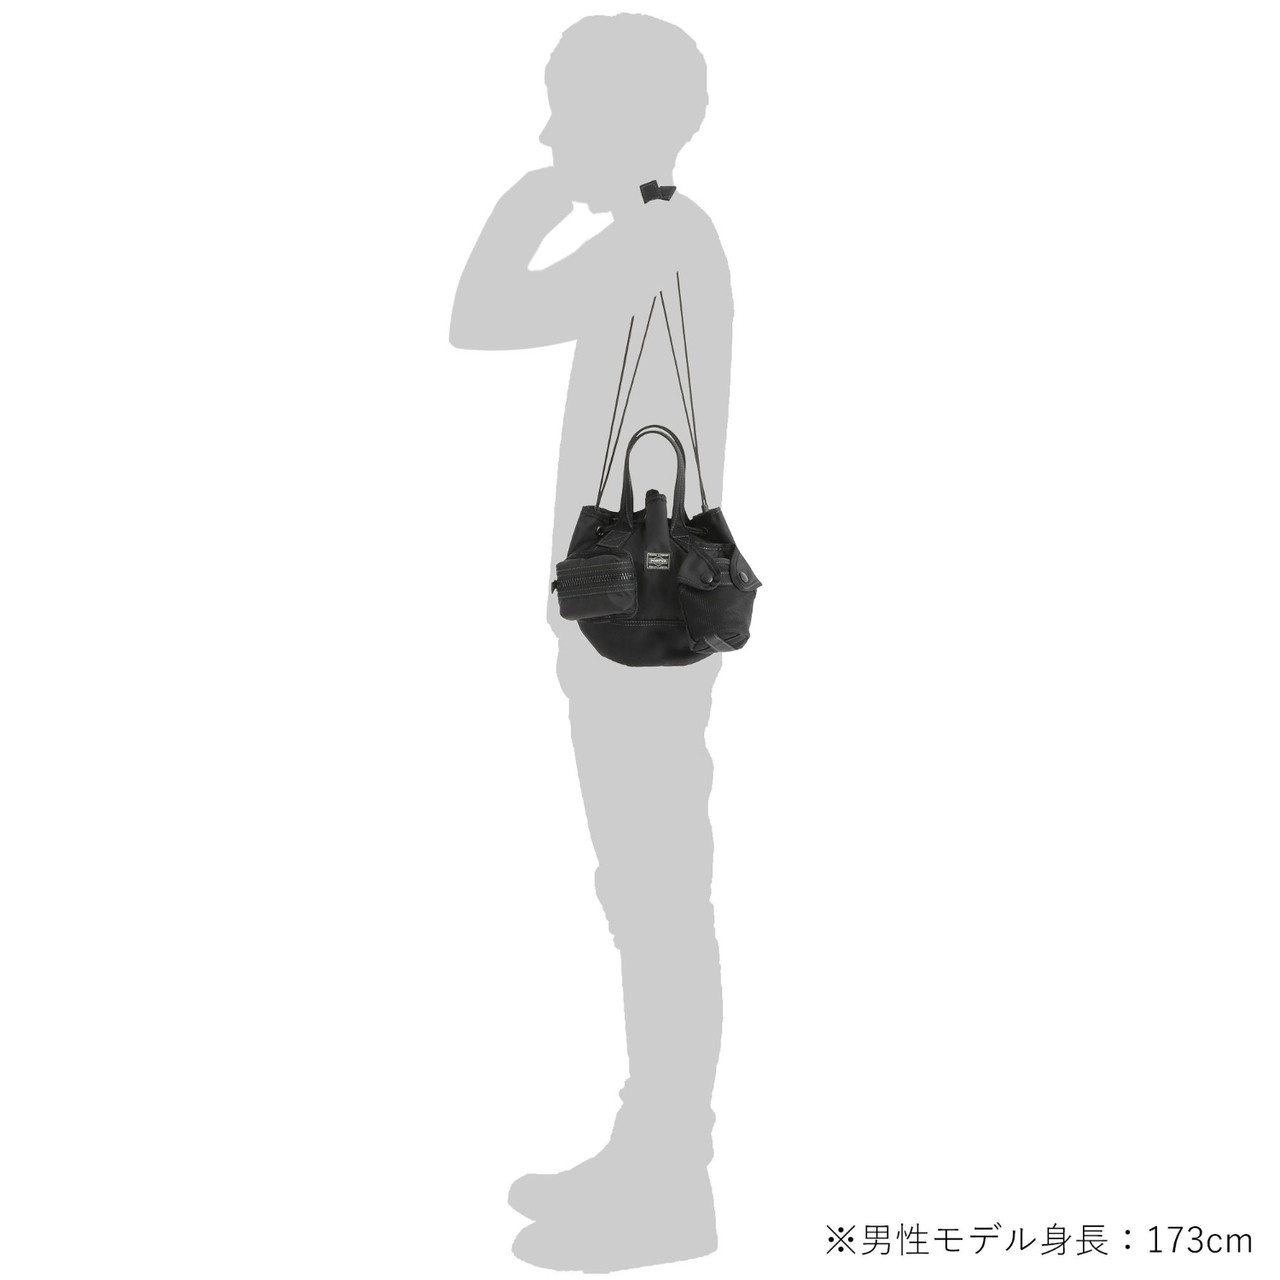 7912A - Tote bag with Scarf